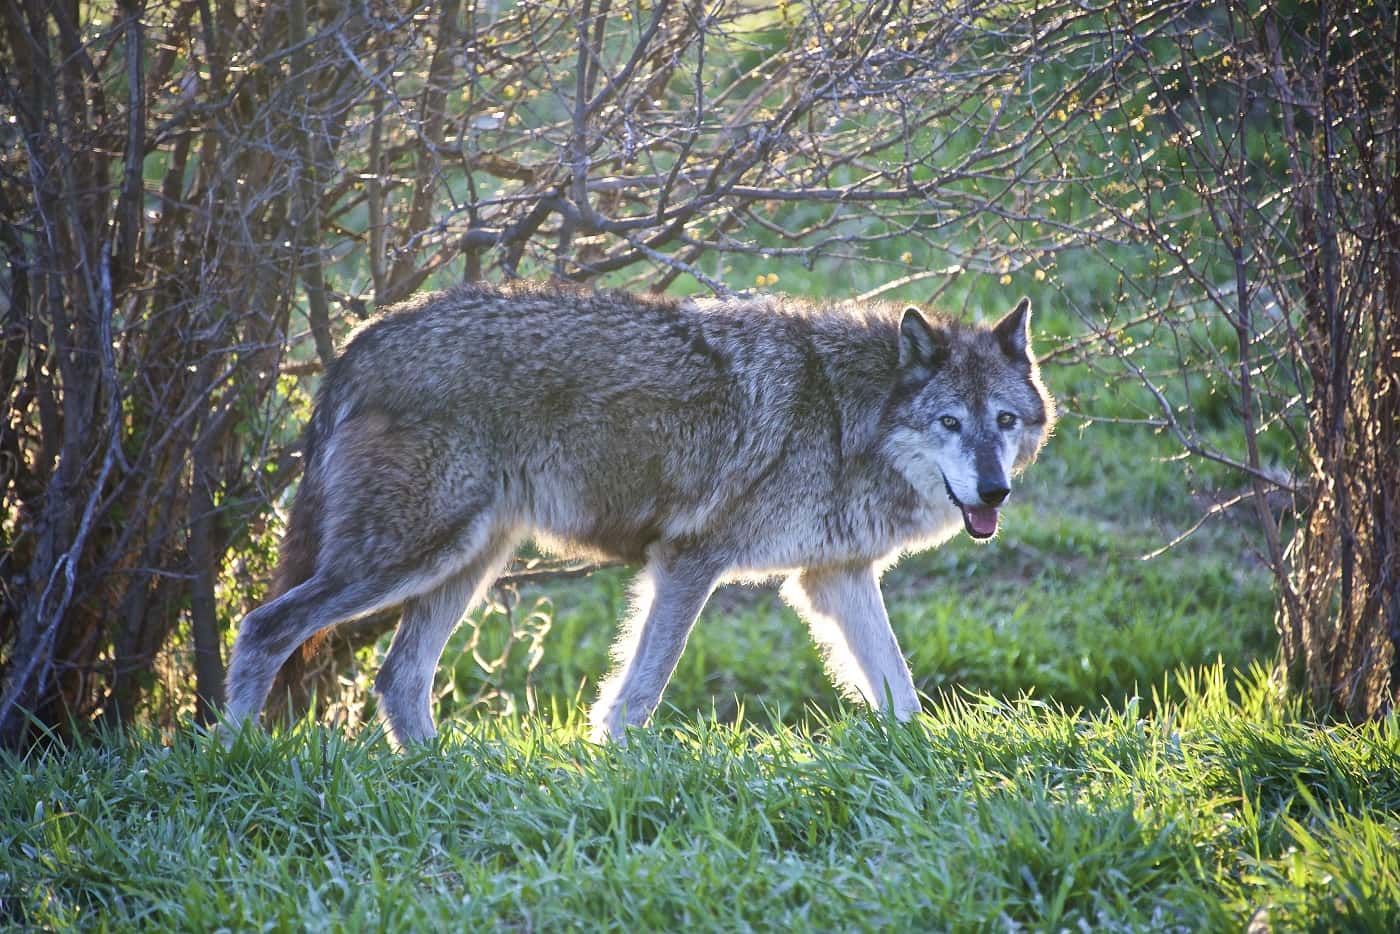 Grey wolf standing in the grass